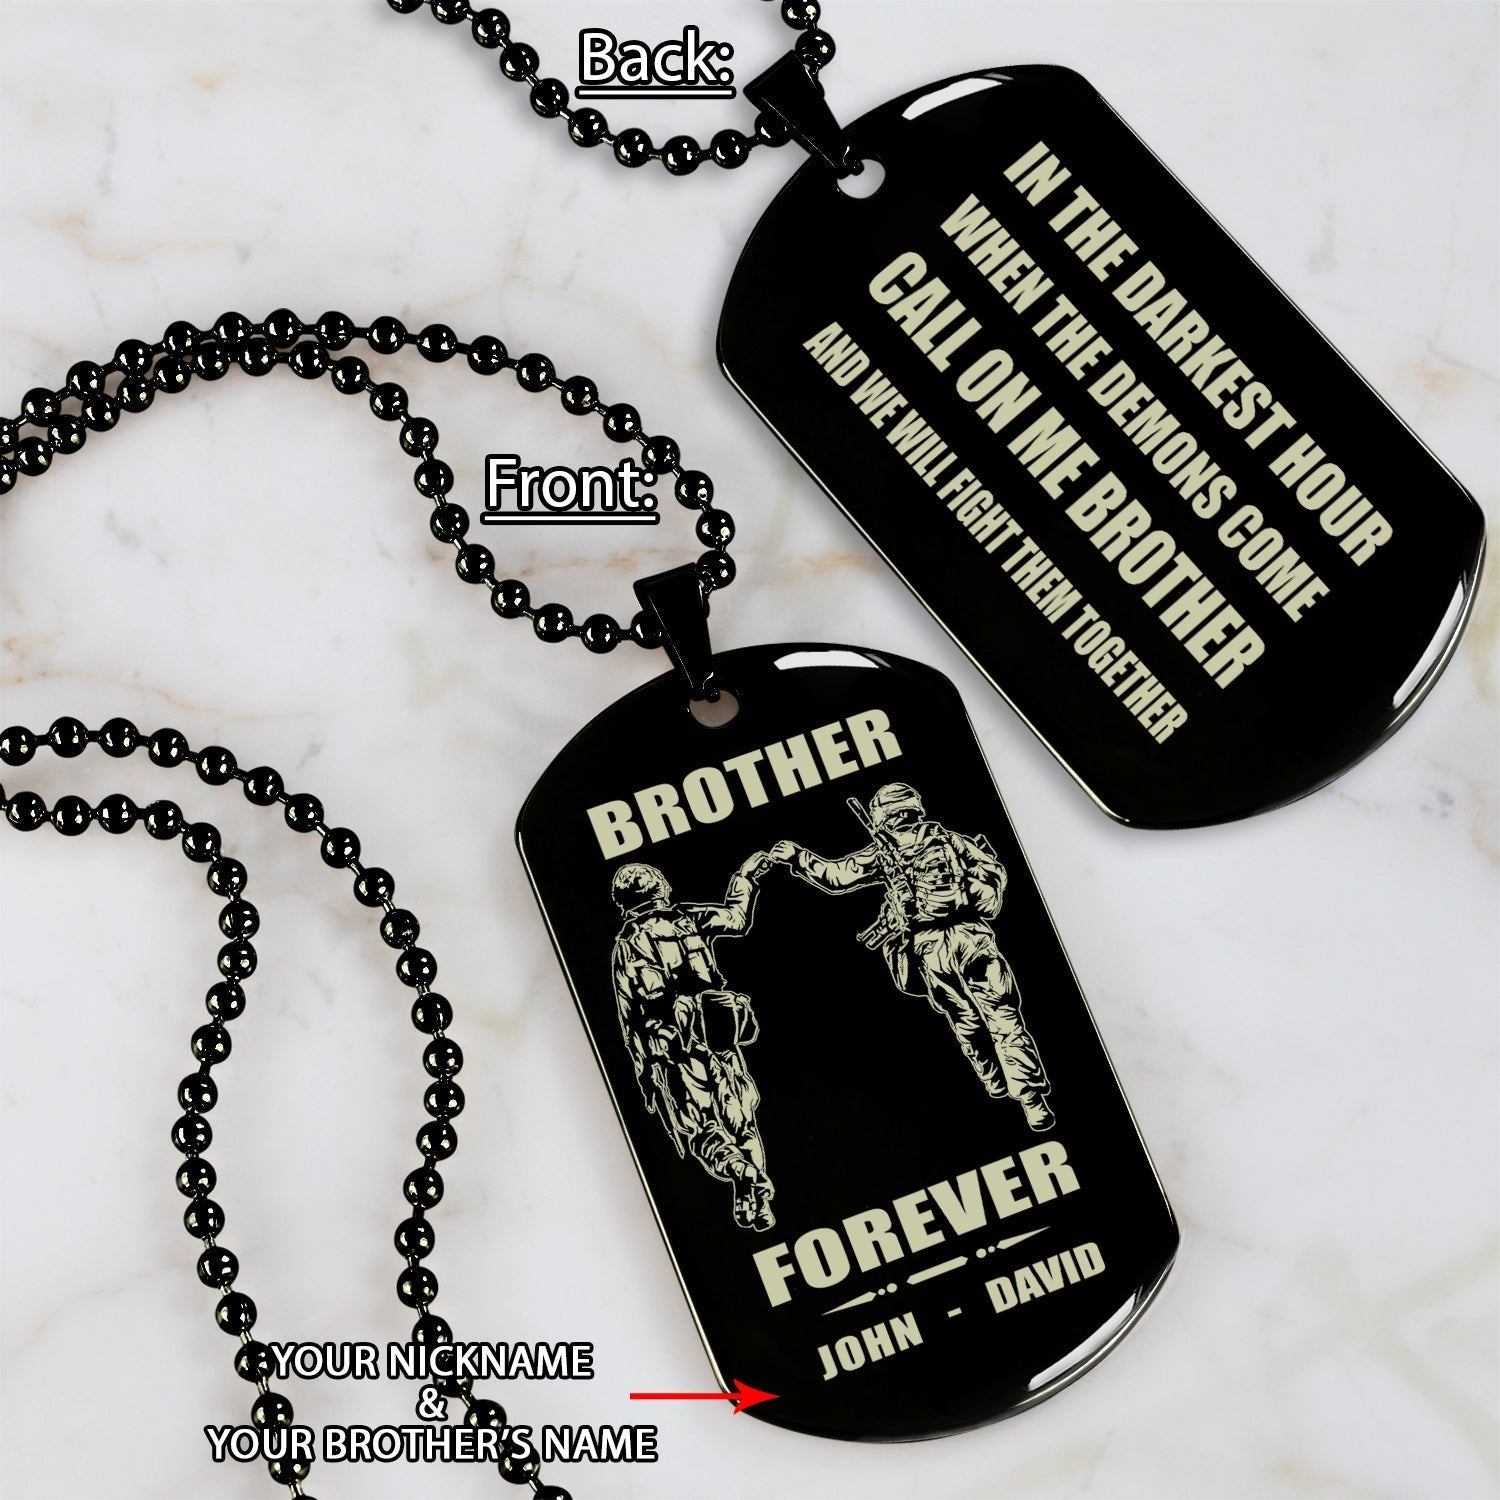 Customizable engraved brother dog tag double sided gift from brother, In the darkest hour, When the demons come call on me brother and we will fight them together, brother forever